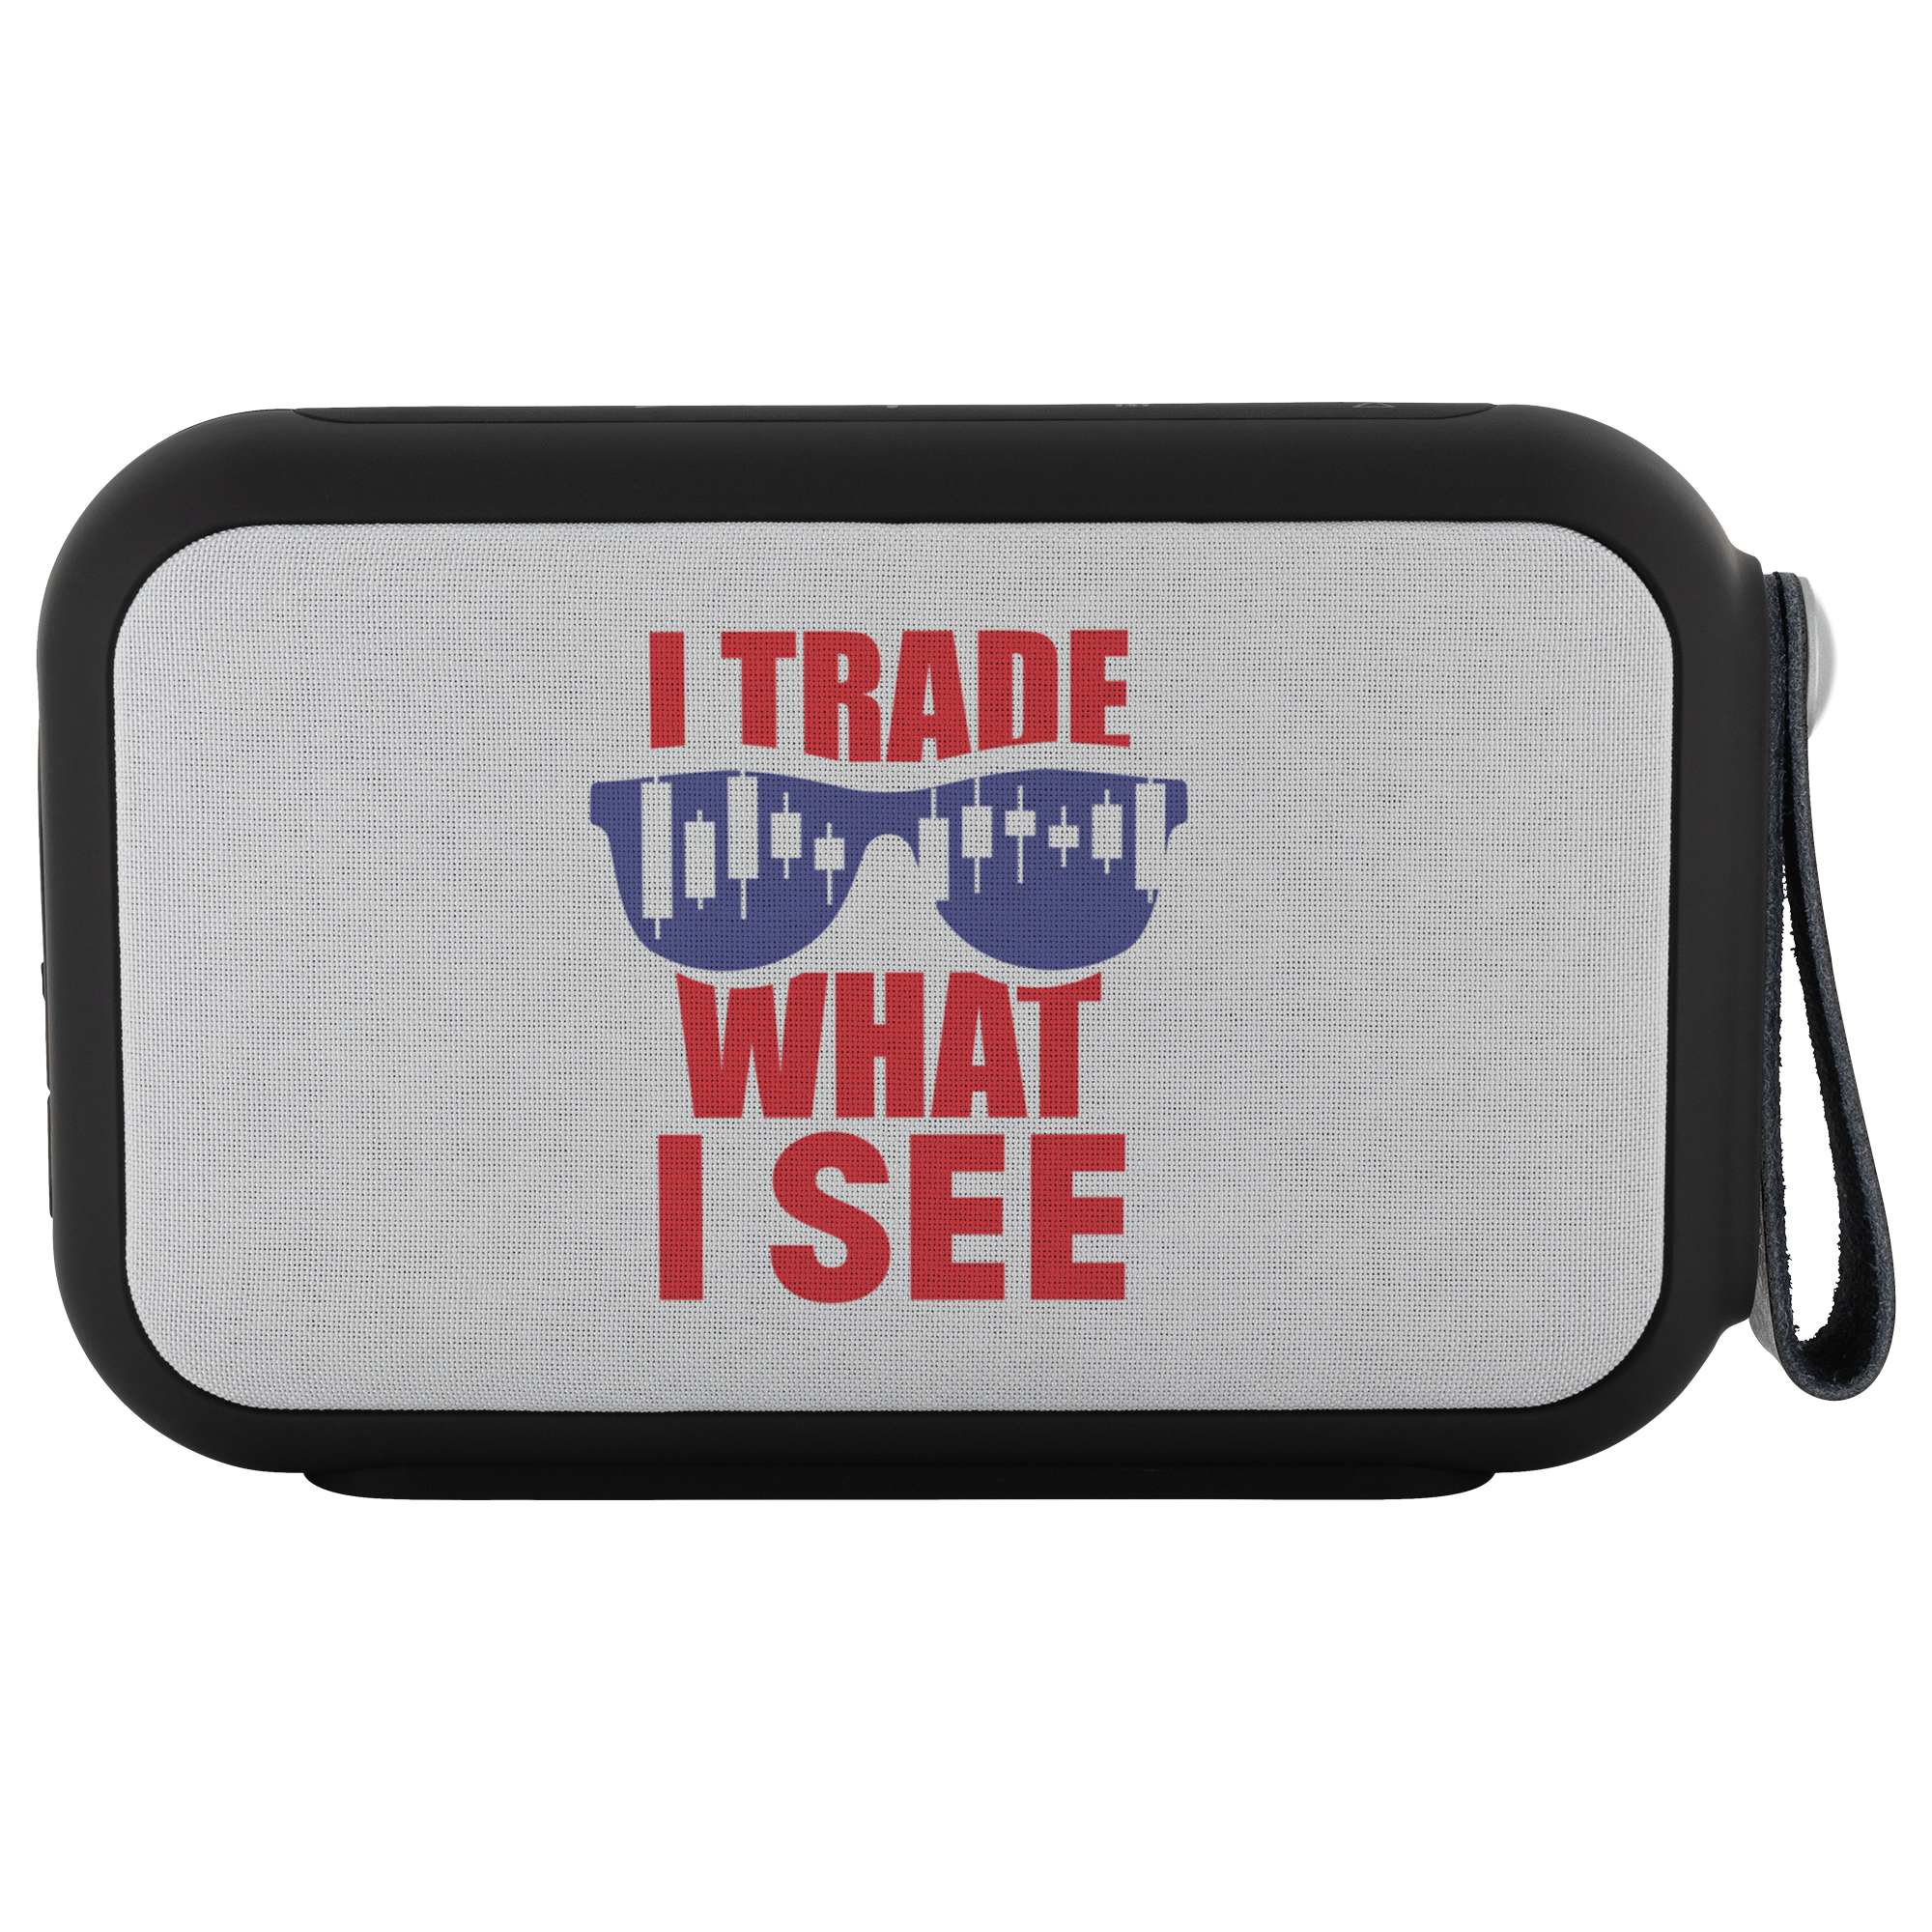 Bluetooth Speaker - Trade What I See - 0